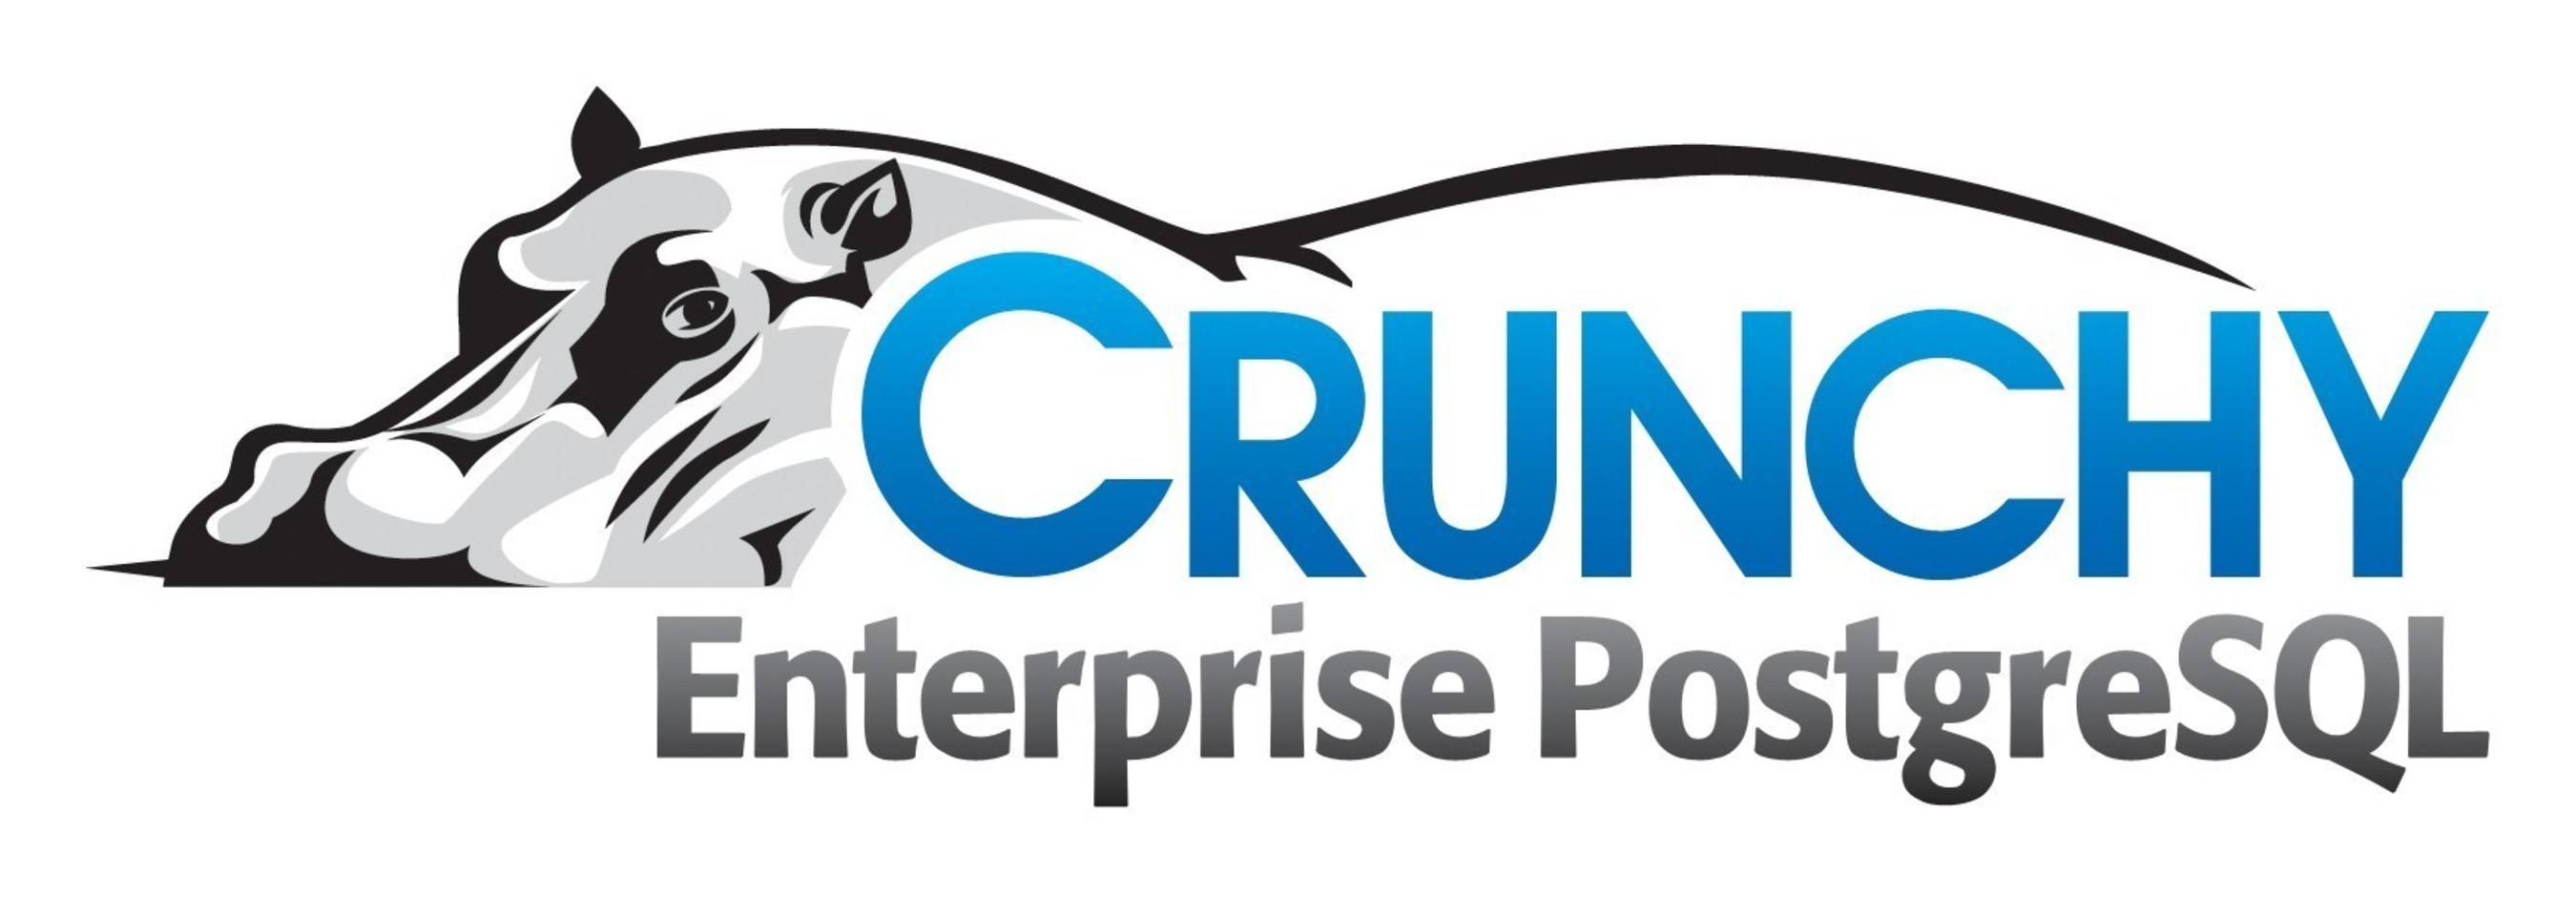 Crunchy Data Solutions' "Certified PostgreSQL" is expected to become the first commercially available open-source database solution to receive Common Criteria certification, paving the way to wider use of the world's most advanced open-source database in national security environments.